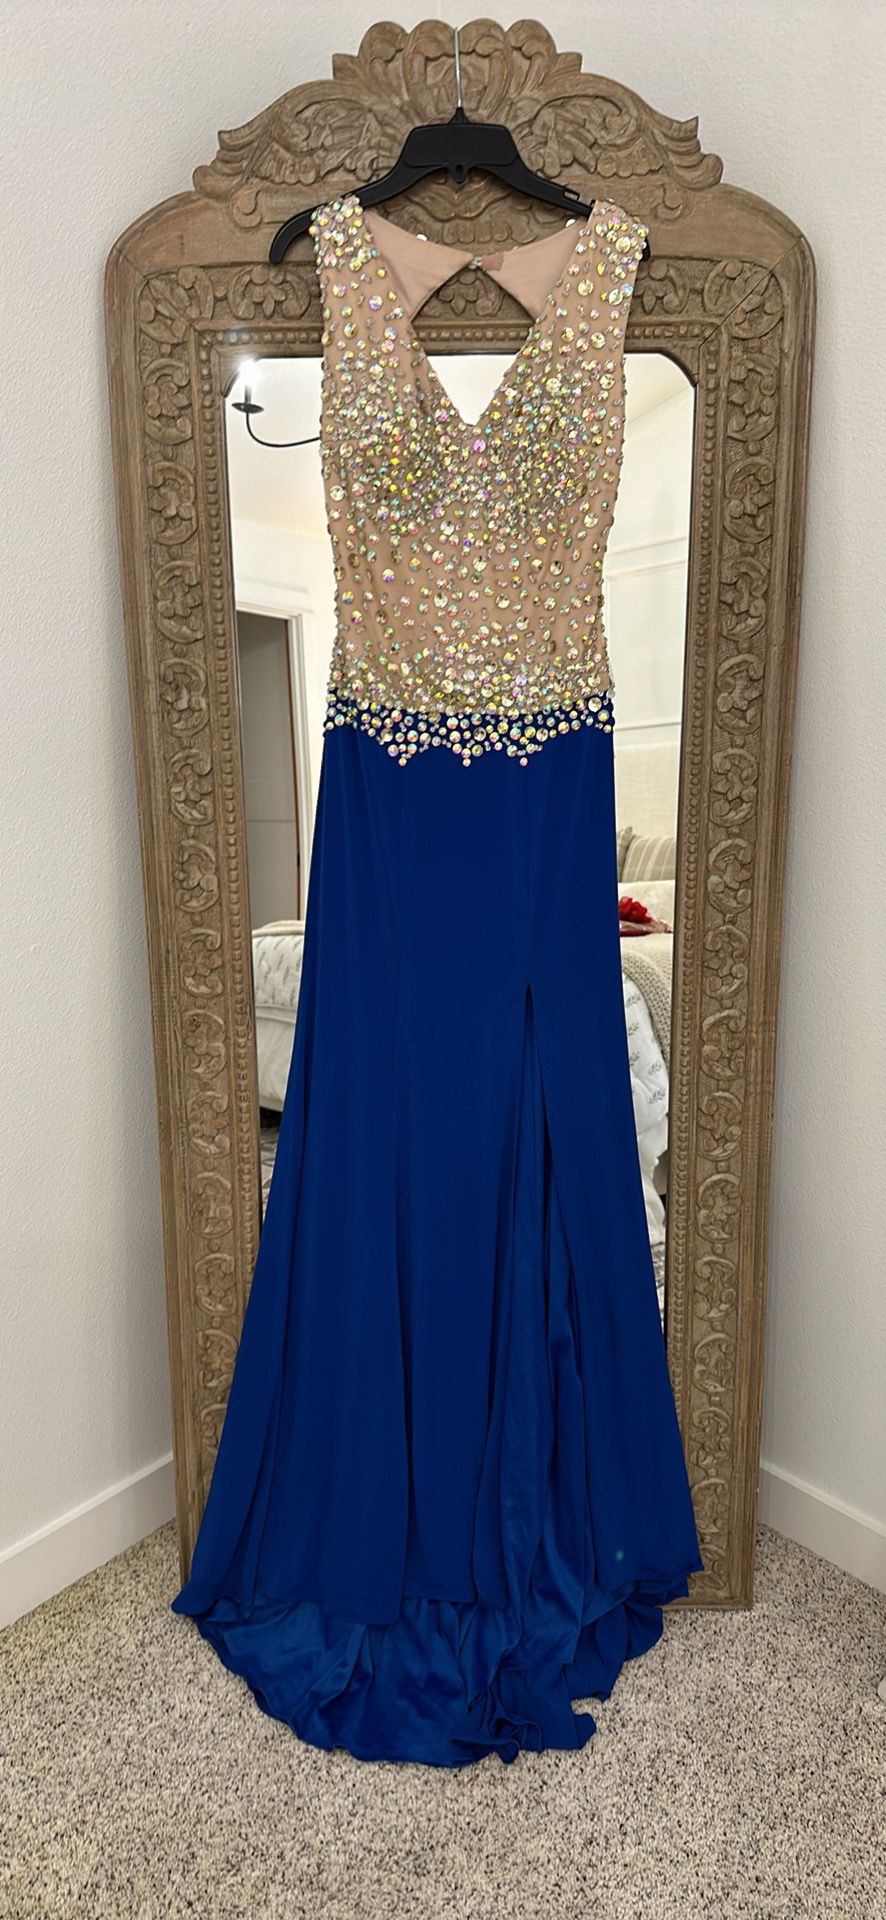 Blue Prom Dress Unworn Tags Attached 